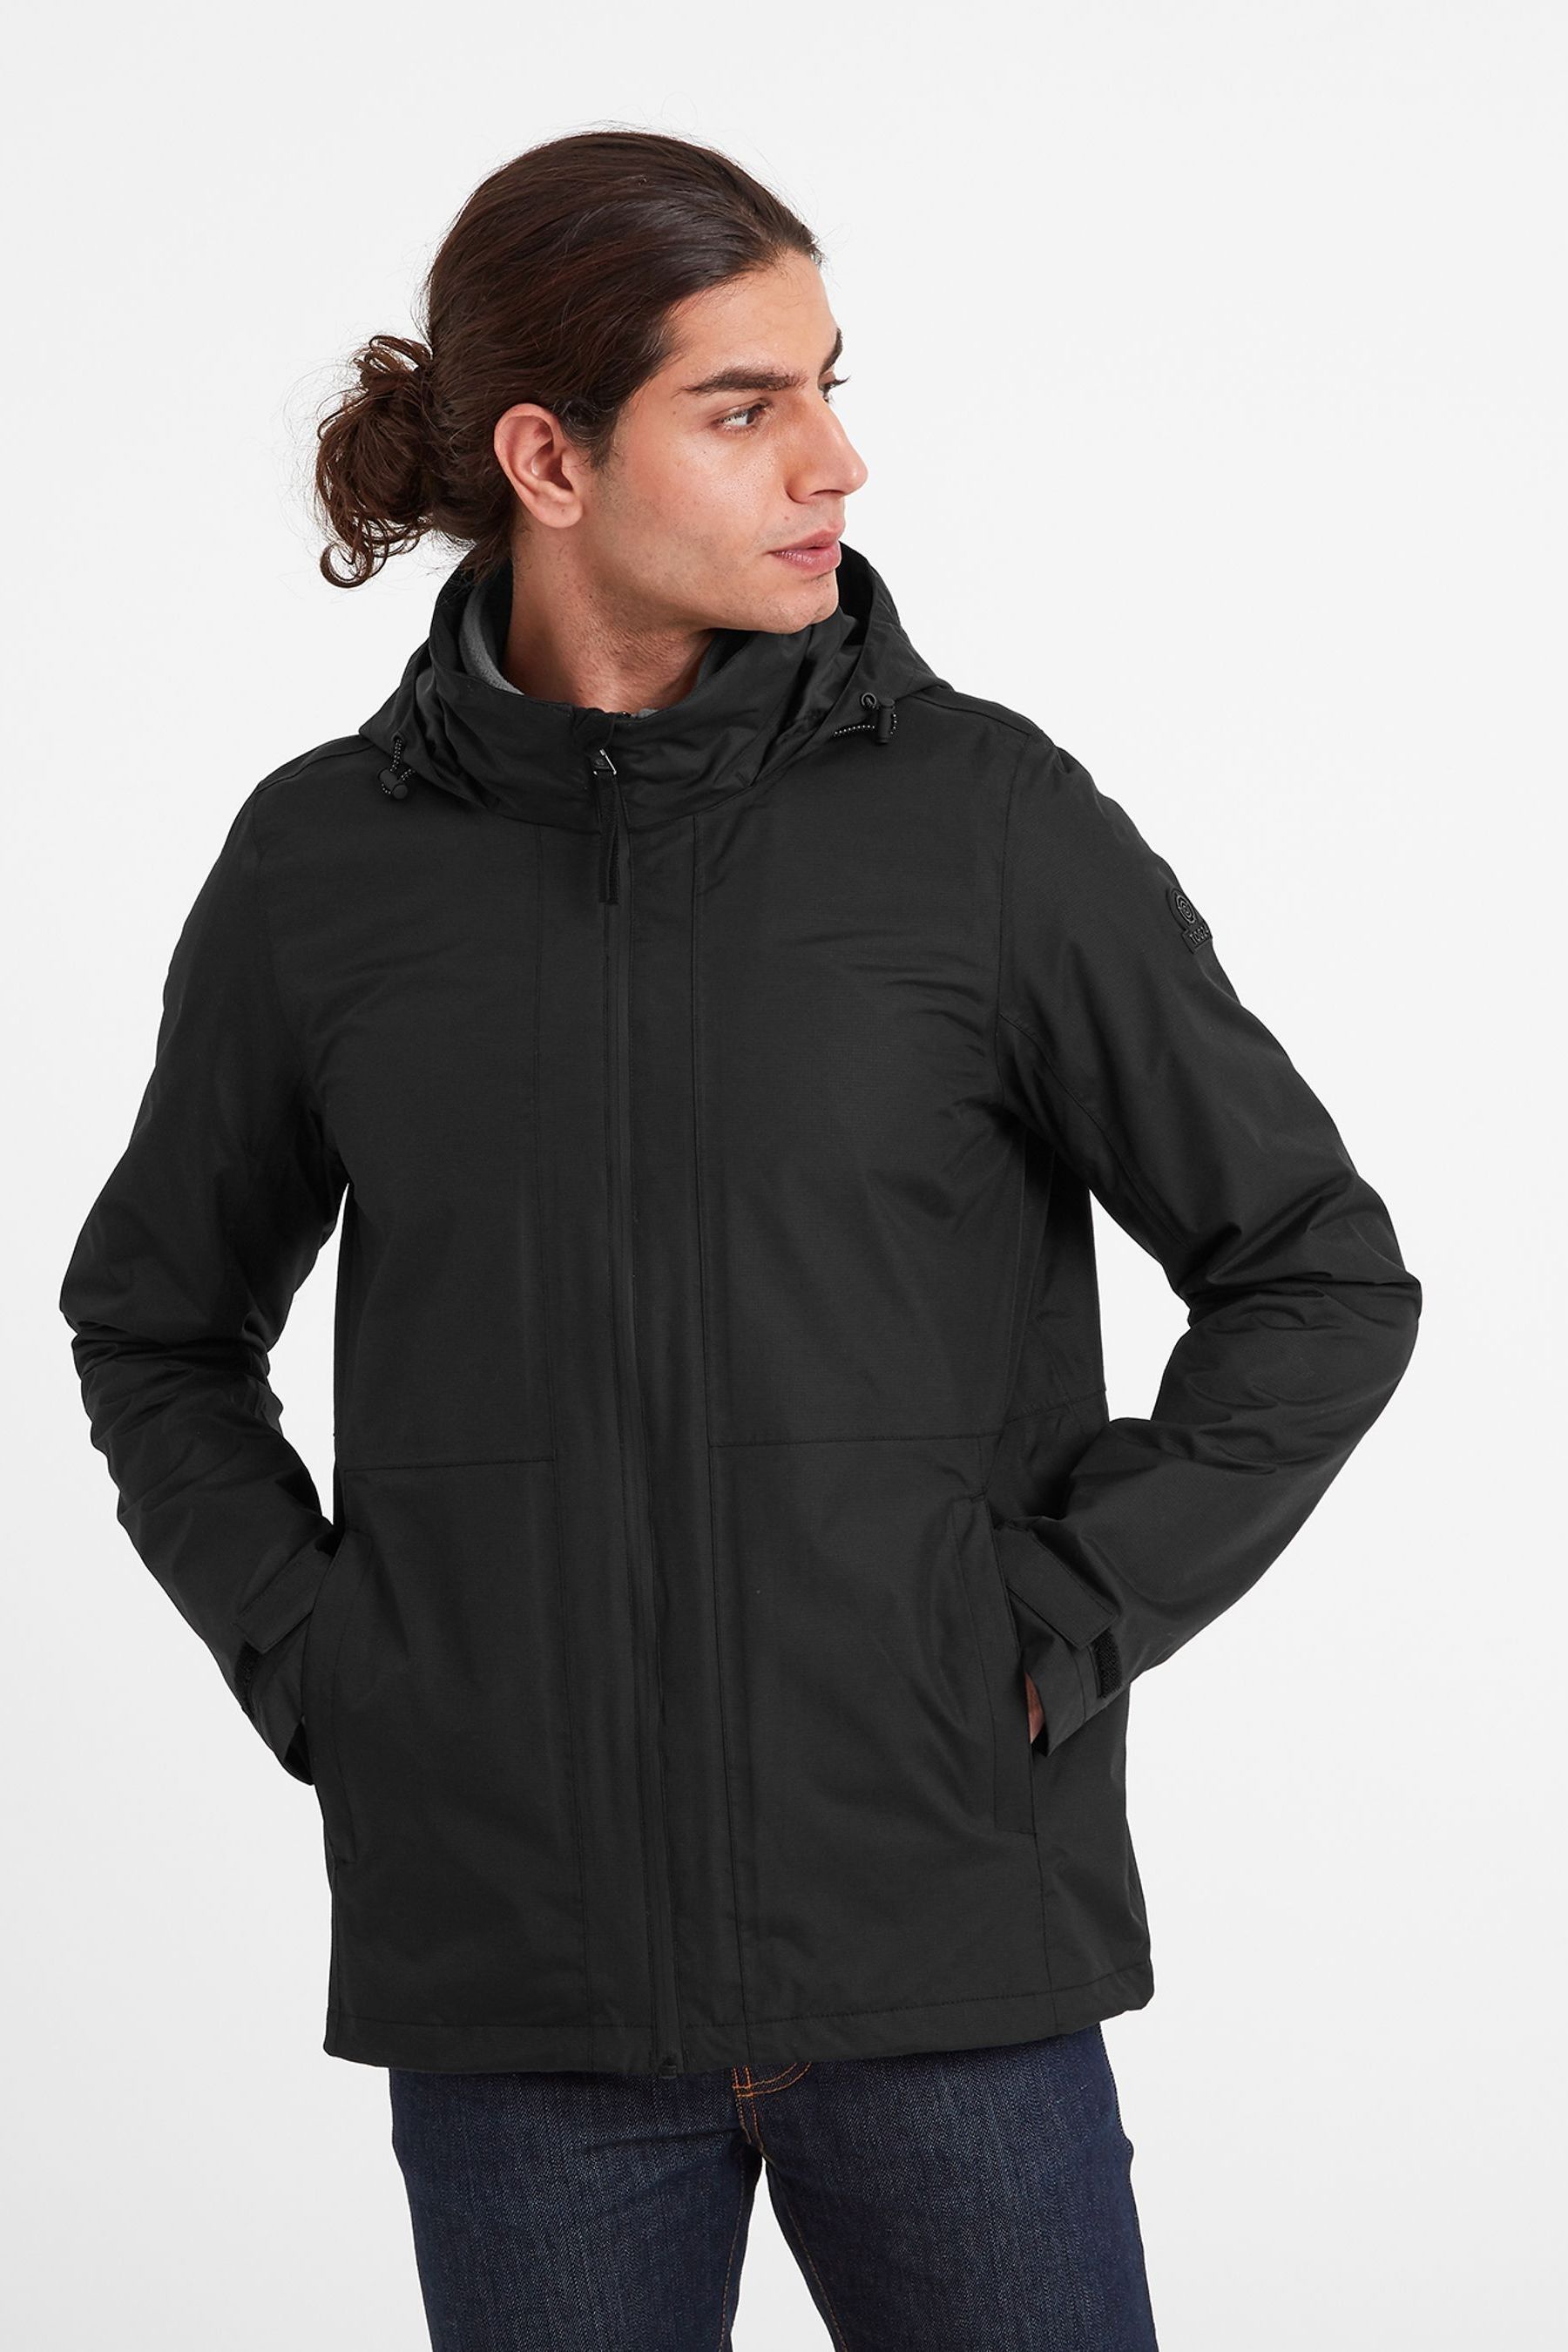 Buy TOG24 Red Gribton Waterproof Jacket from the Next UK online shop